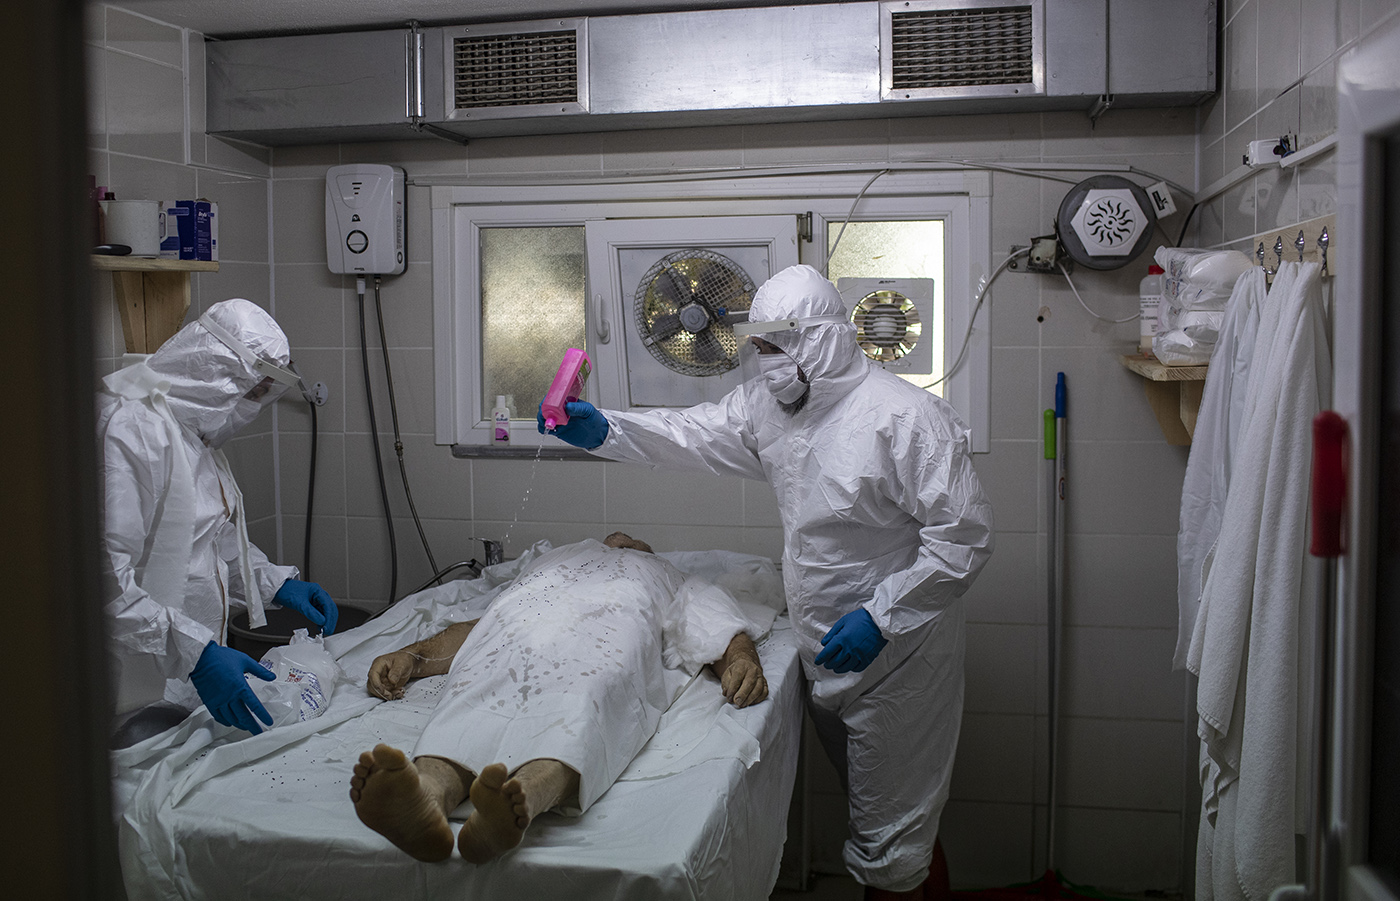 Morgue workers wear personal protective equipment (PPE) as they prepare a body of Covid-19 victim for a funeral ceremony at the Cekmekoy morgue in Istanbul, Turkey, 18 September 2020. 